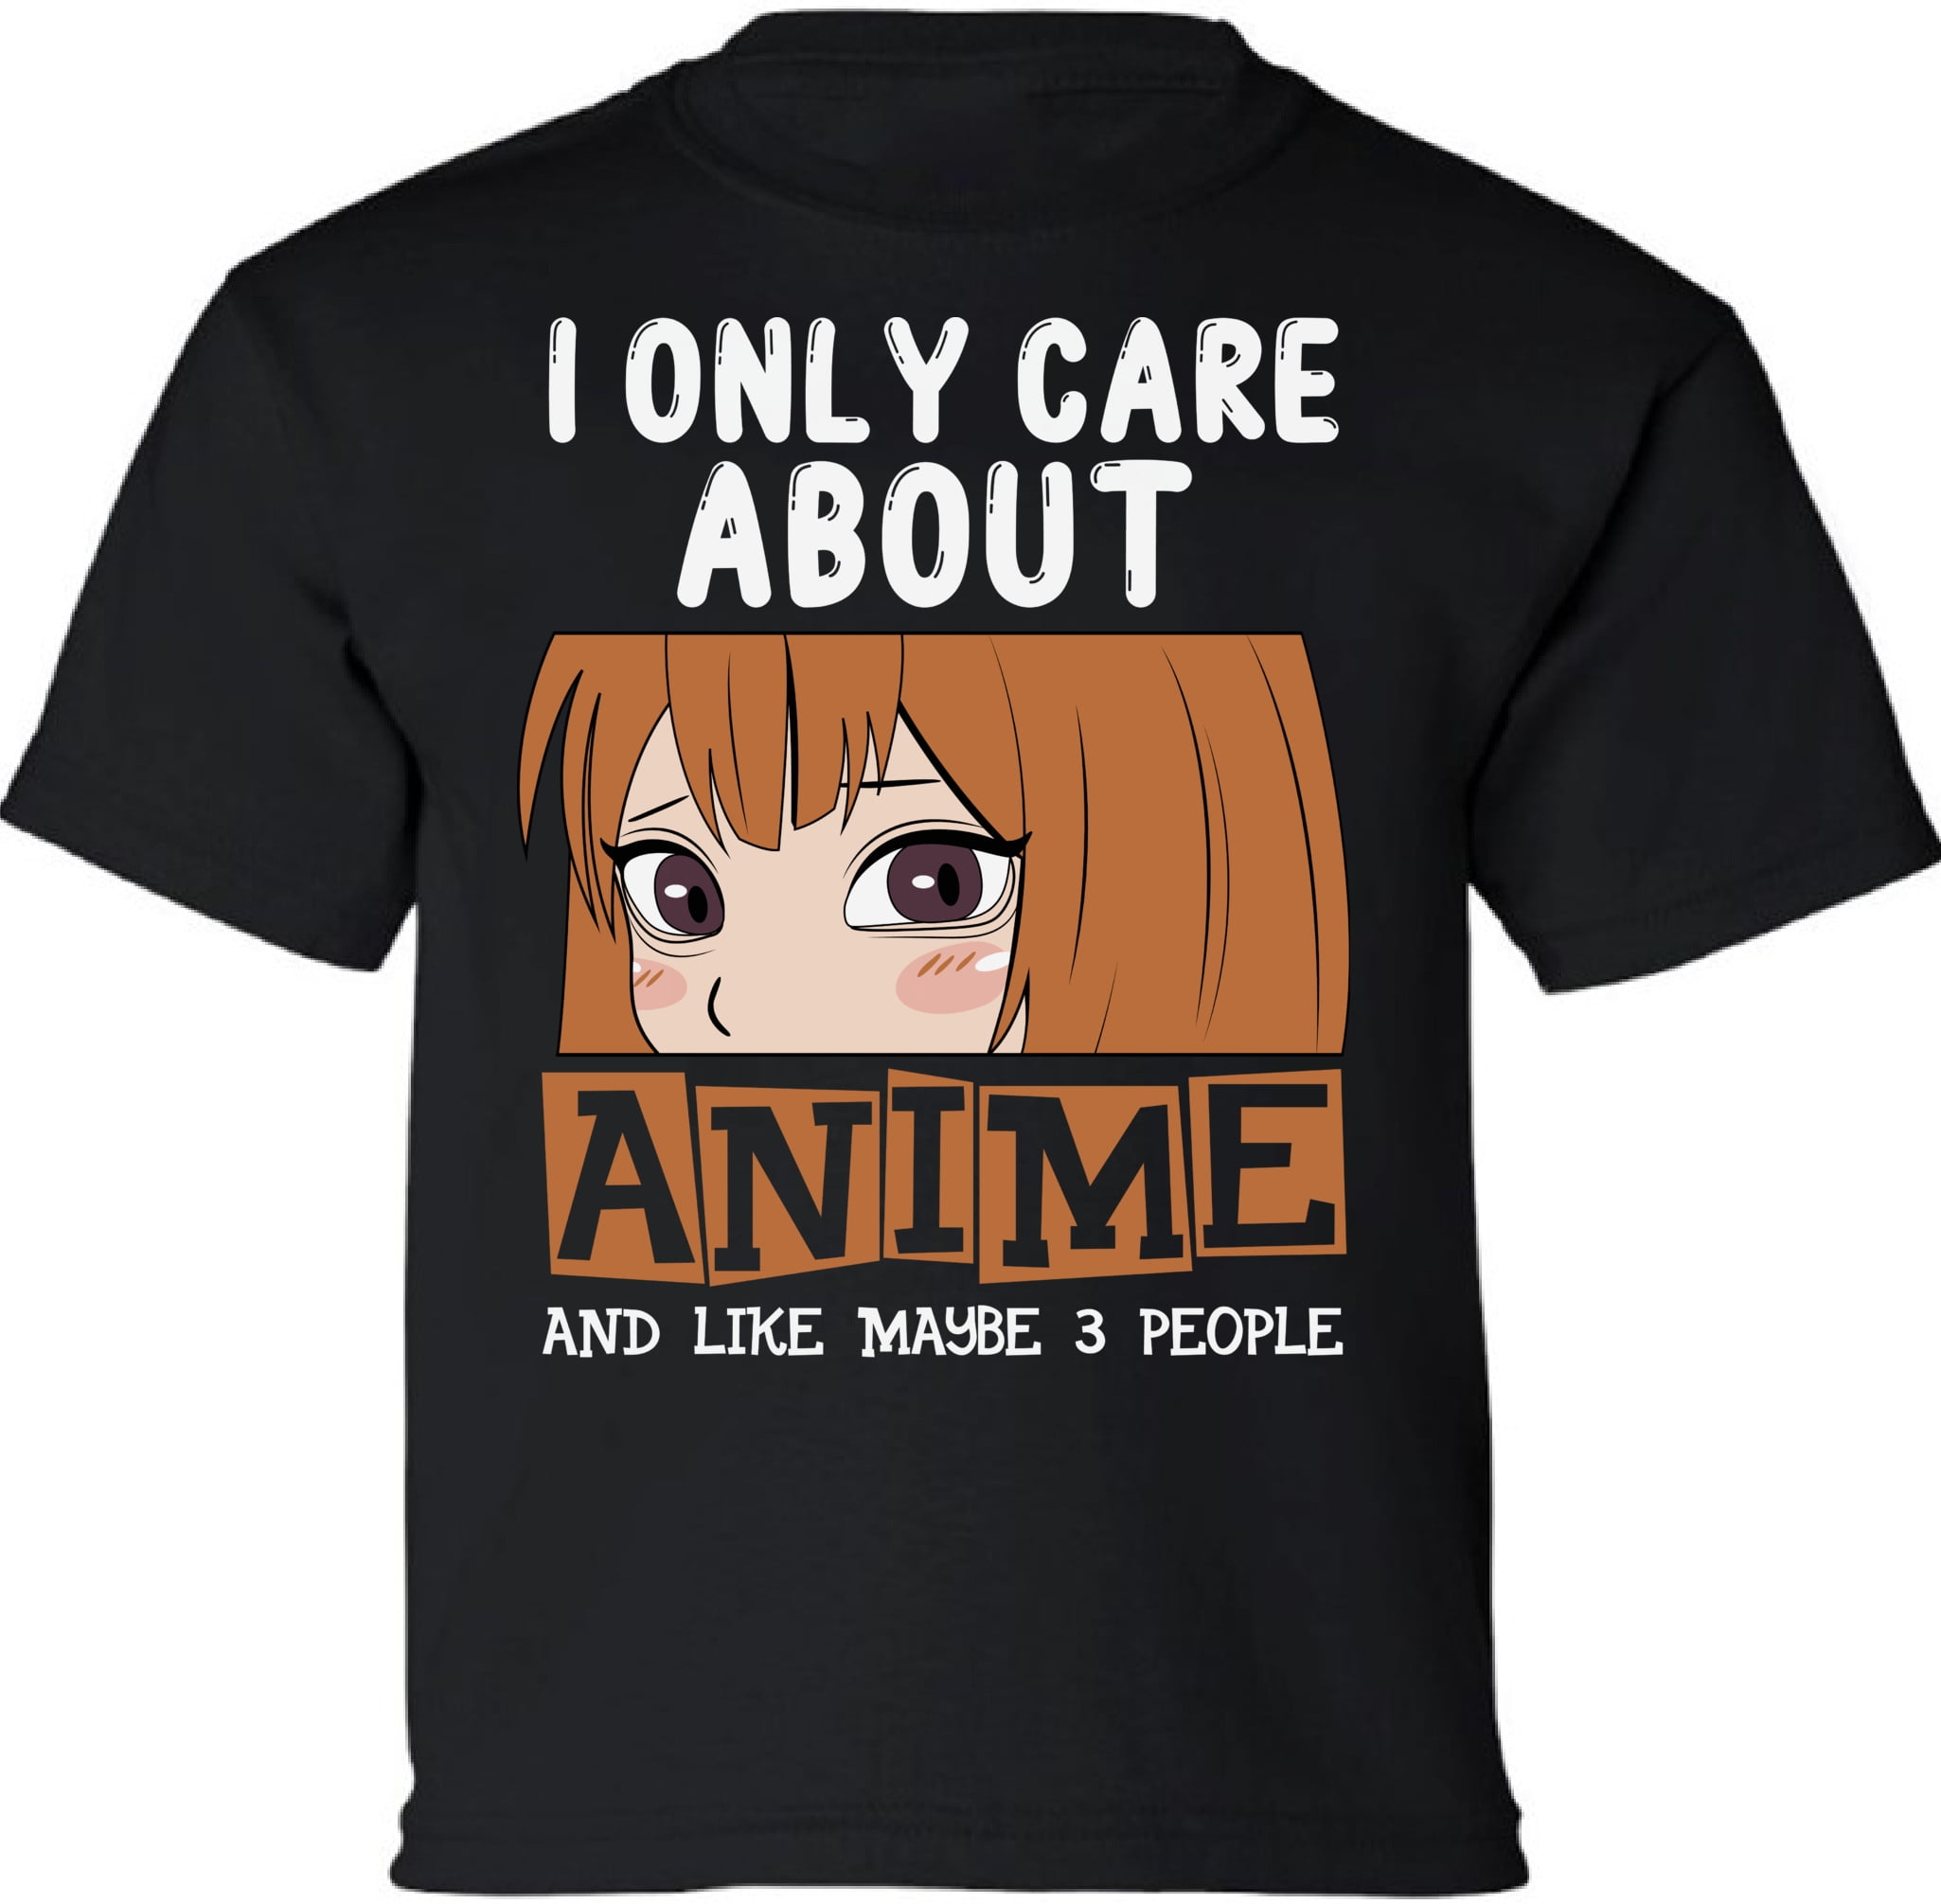 Youth T-shirt I Only Care About Anime Kids Tees - XS S M L XL Japanese  Kawaii - Anime Clothes Short Sleeve Boys Girls Graphic Tee 